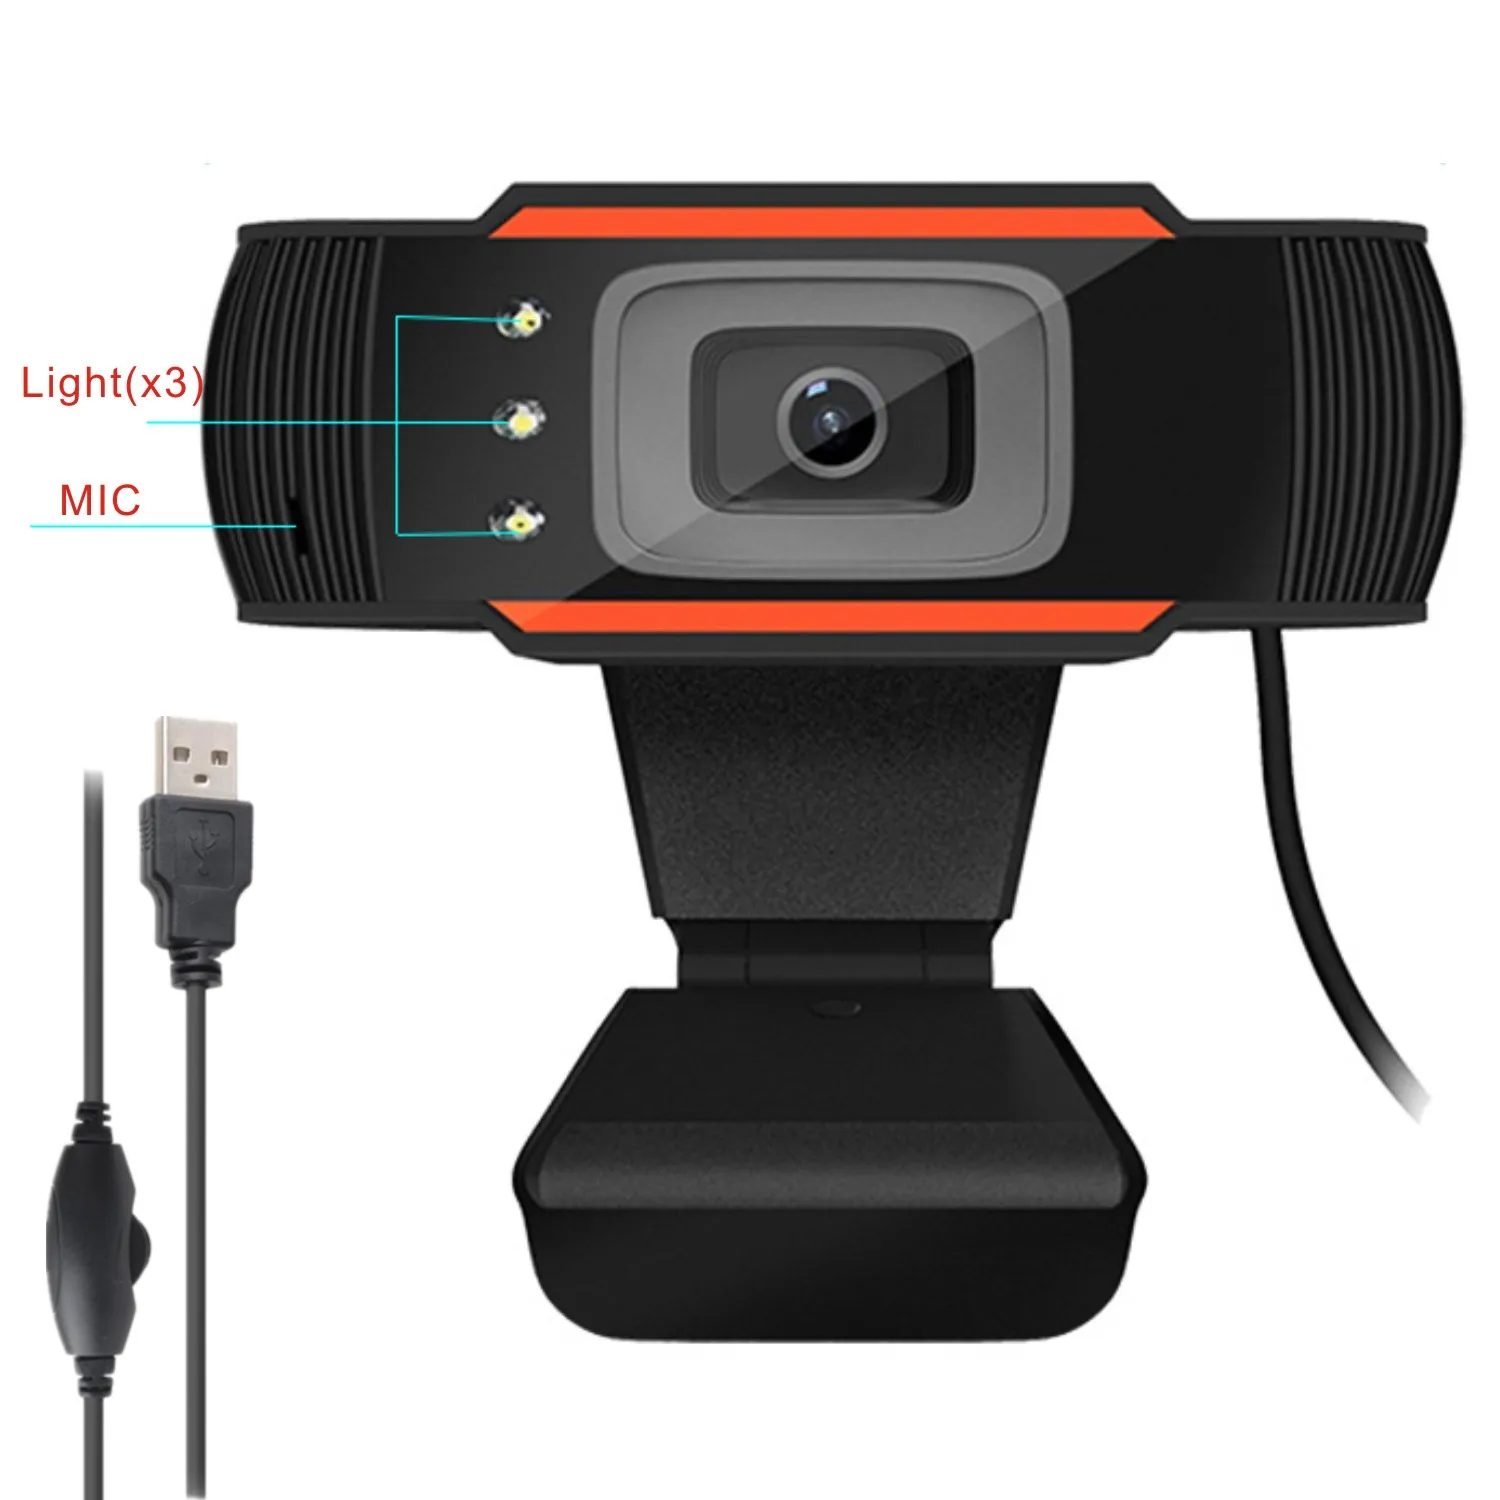 

WebCam 480P HD LED Lights Fill Light 1080P Web Camera USB Built-In Sound Mic Webcan For PC Laptop Live Broadcast Video Calling